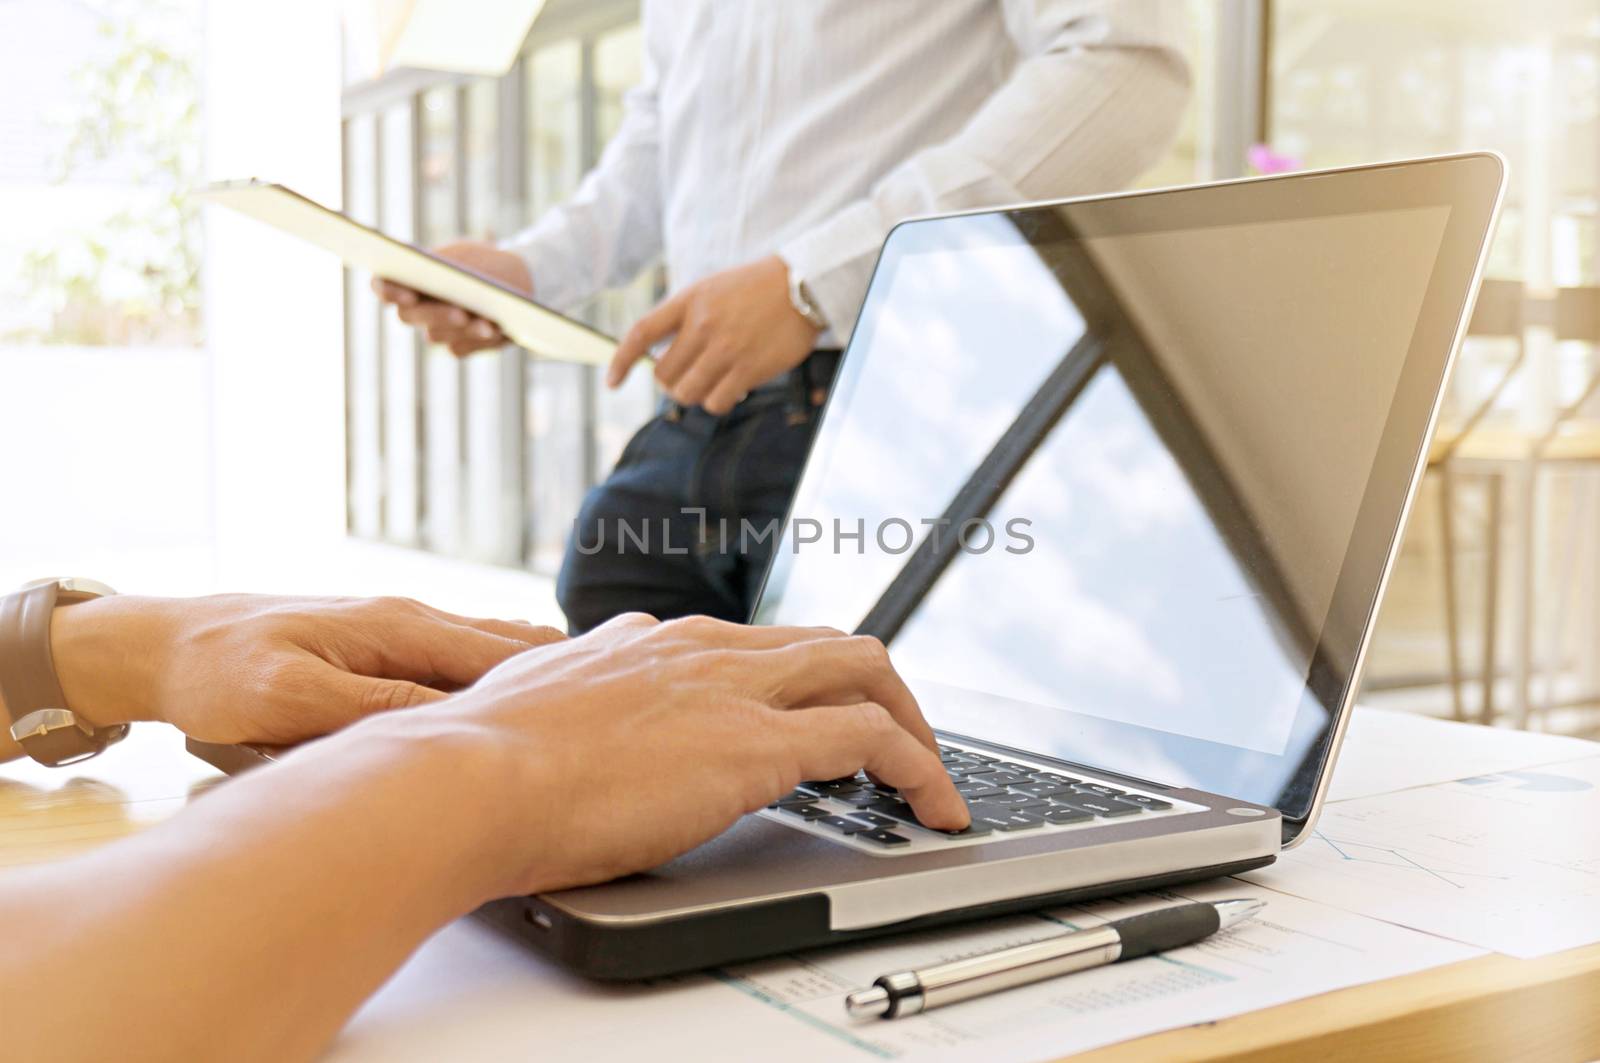 image of a young man working on his laptop in library, rear view of business man hands busy using laptop at office desk, young male student typing on computer sitting at wooden table.